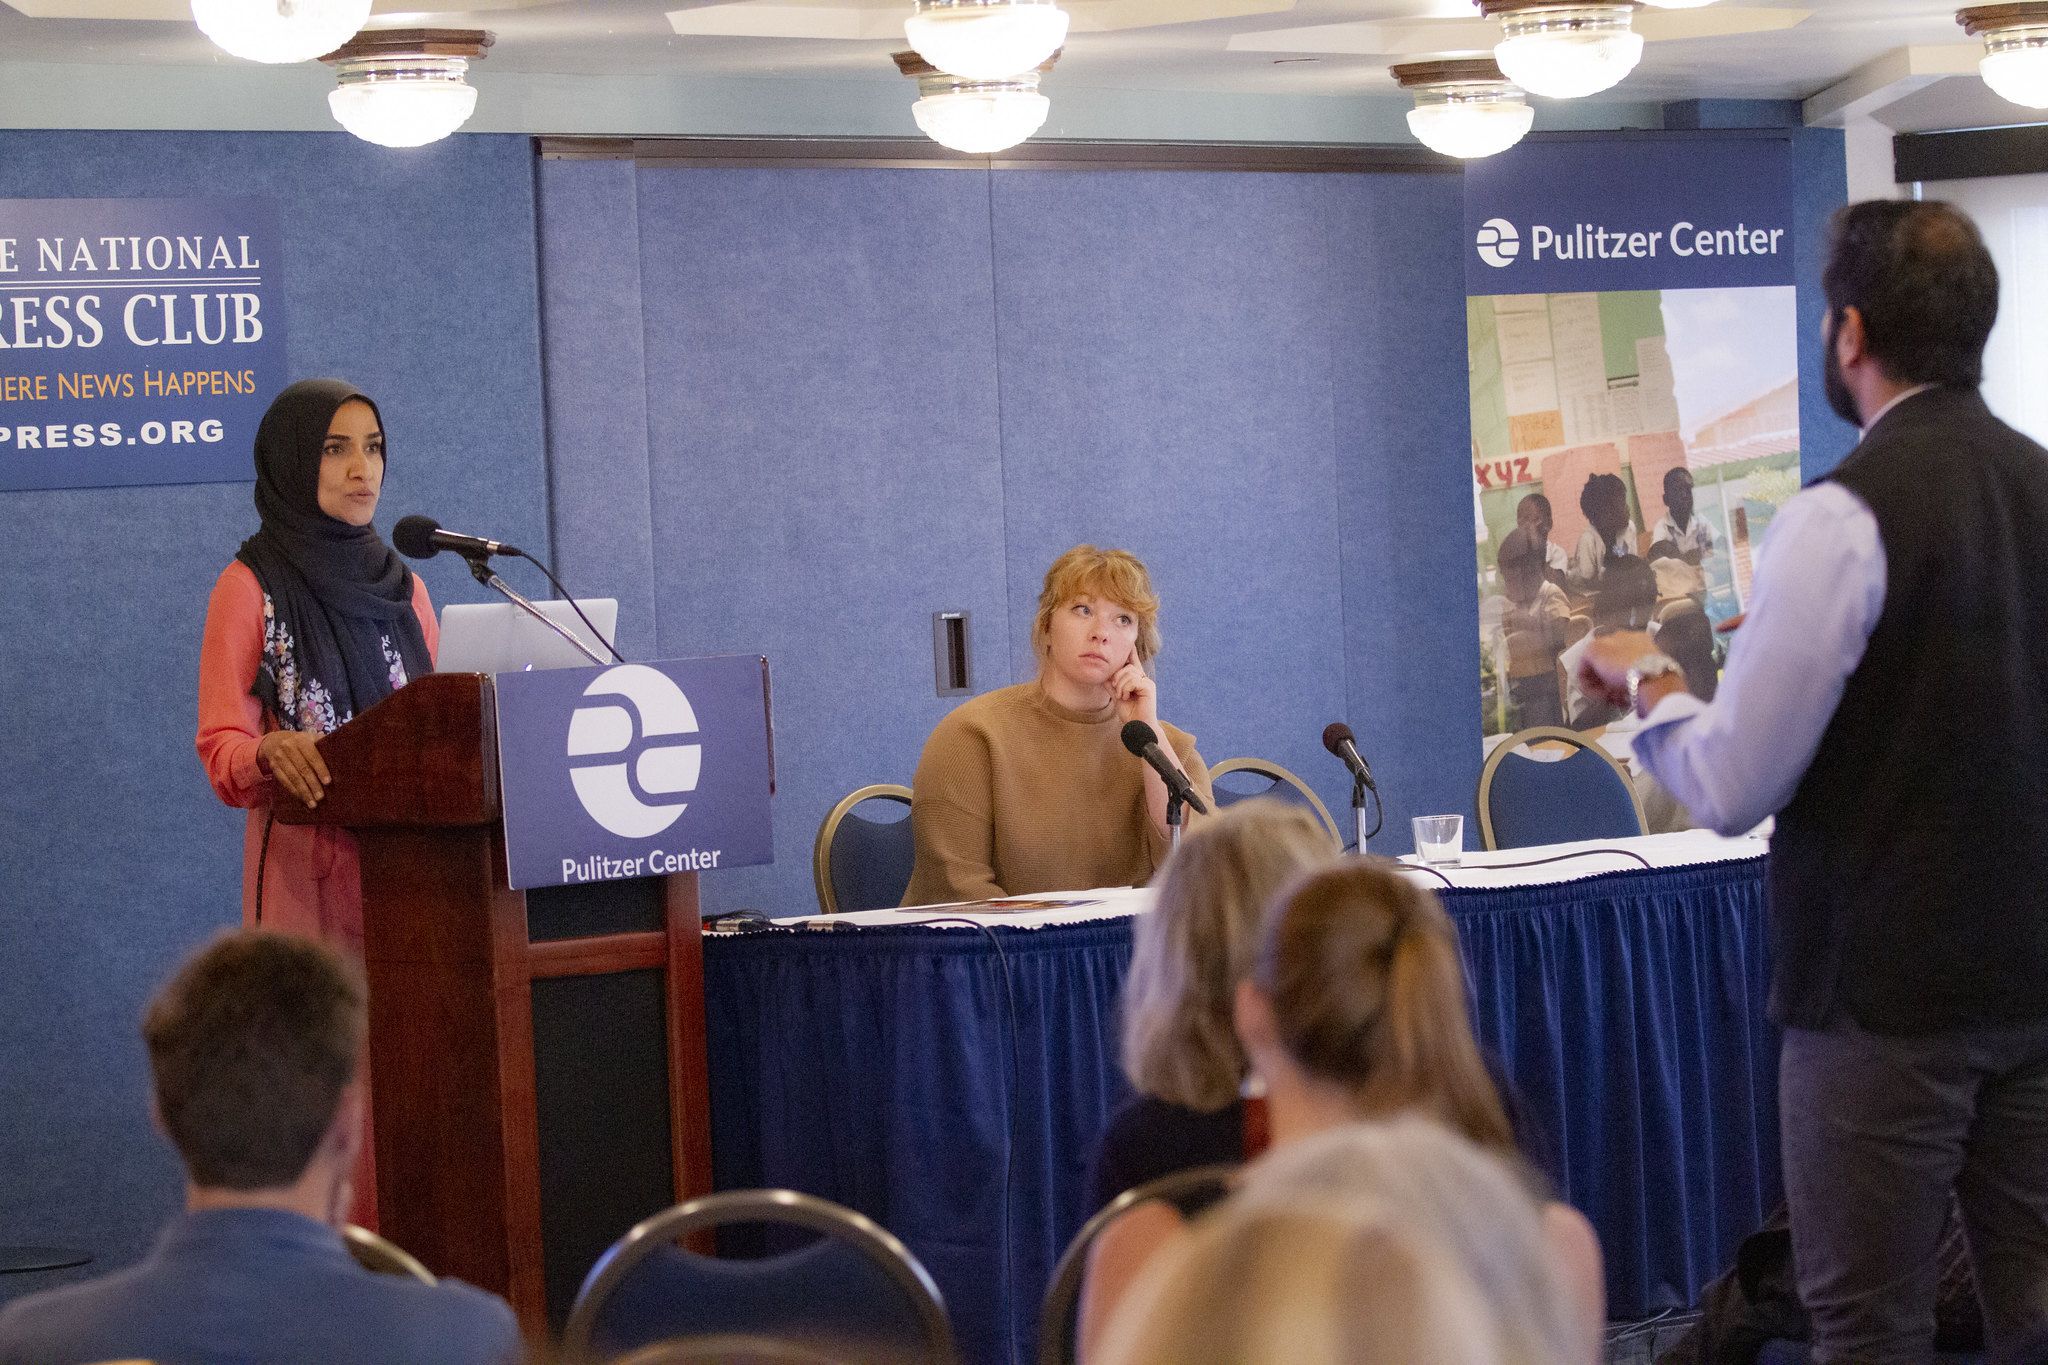 Dalia Mogahed and Kat Coplen of the Institute for Social Policy and Understanding take questions following their presentation. Image by Jin Ding. Washington, D.C., 2019.